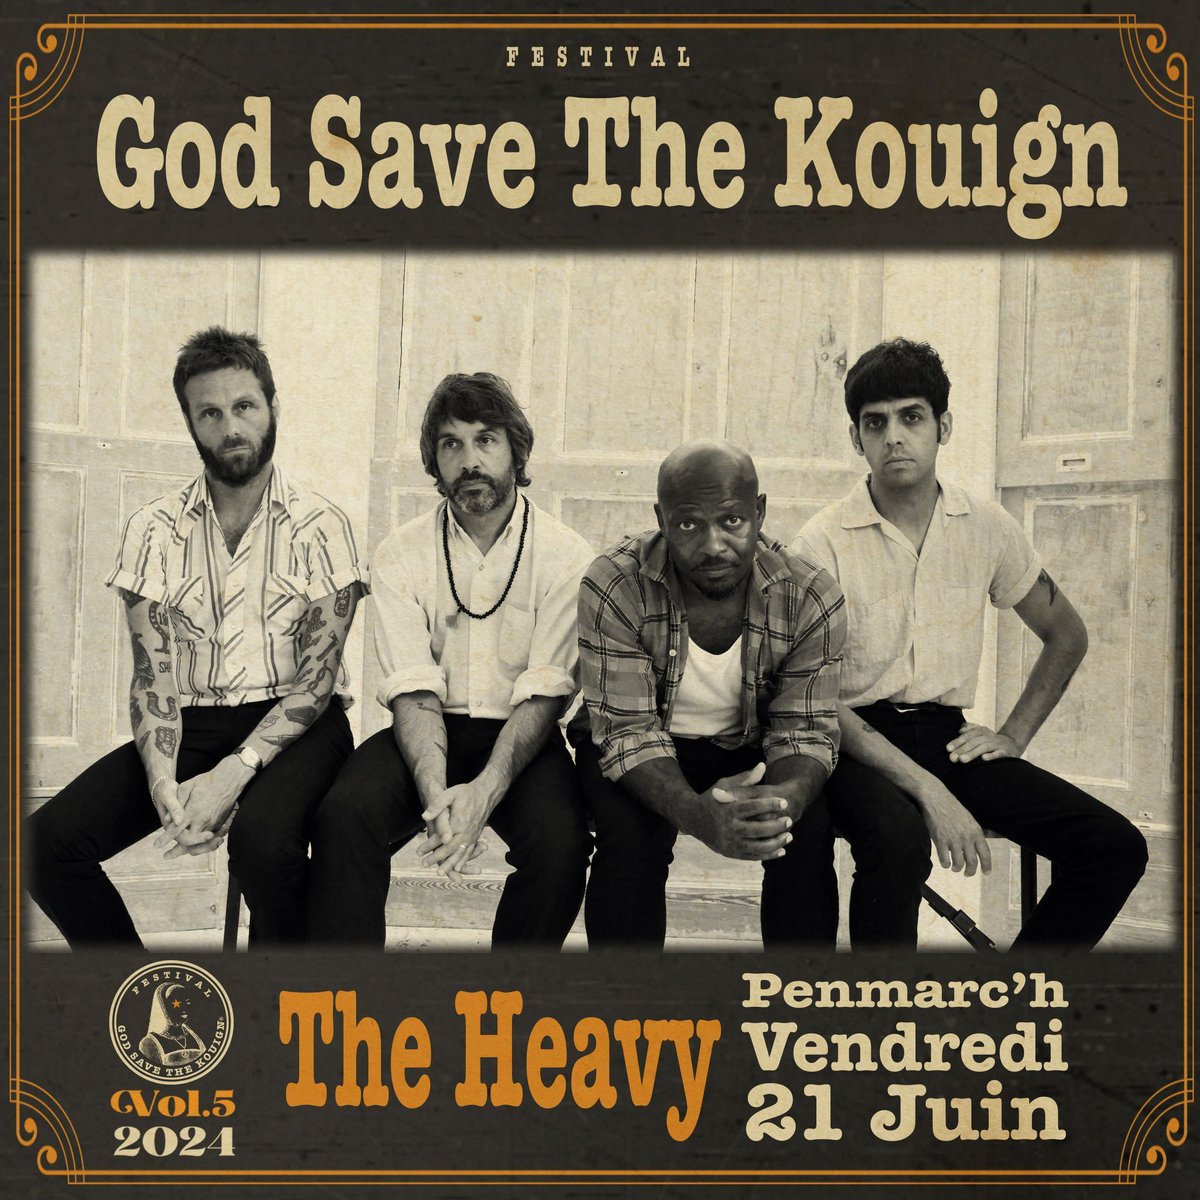 We can't wait to headline God Save The Kouign in France next summer! Grab your tickets at ticketmaster.fr/fr/manifestati….